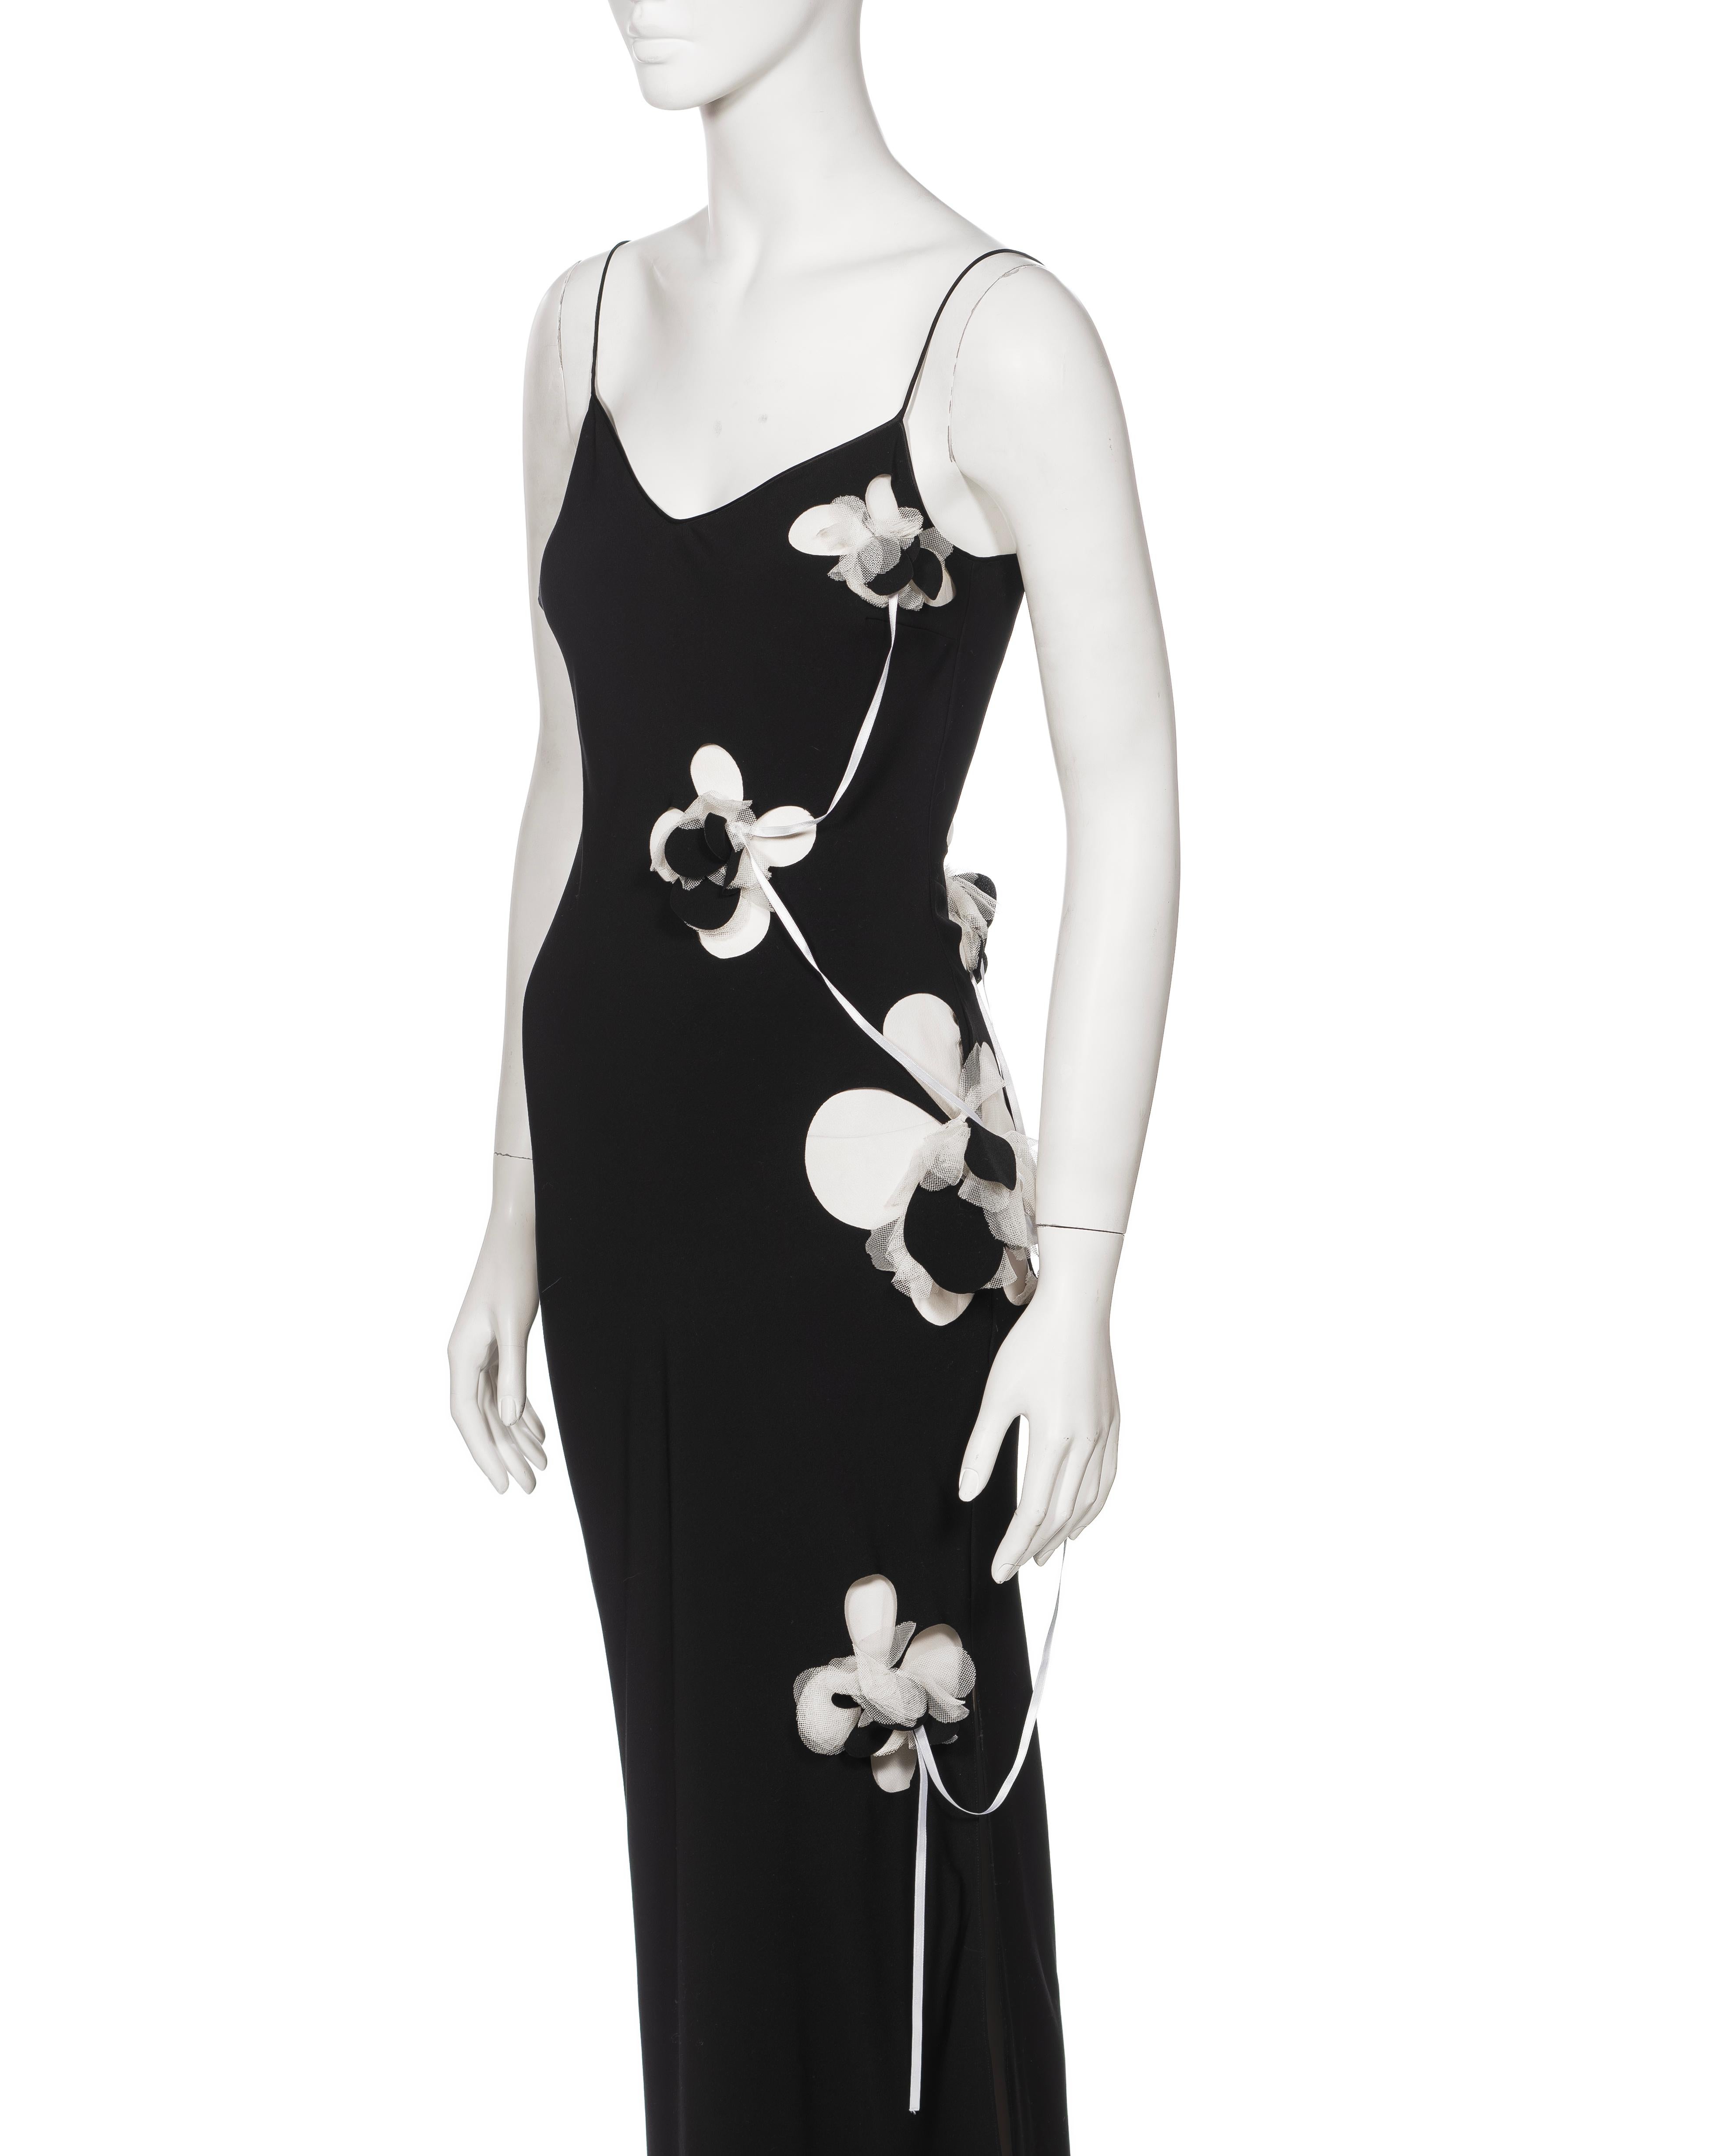 John Galliano Black Silk Slip Dress with Floral Appliqués and Ribbons, FW 2001 For Sale 6